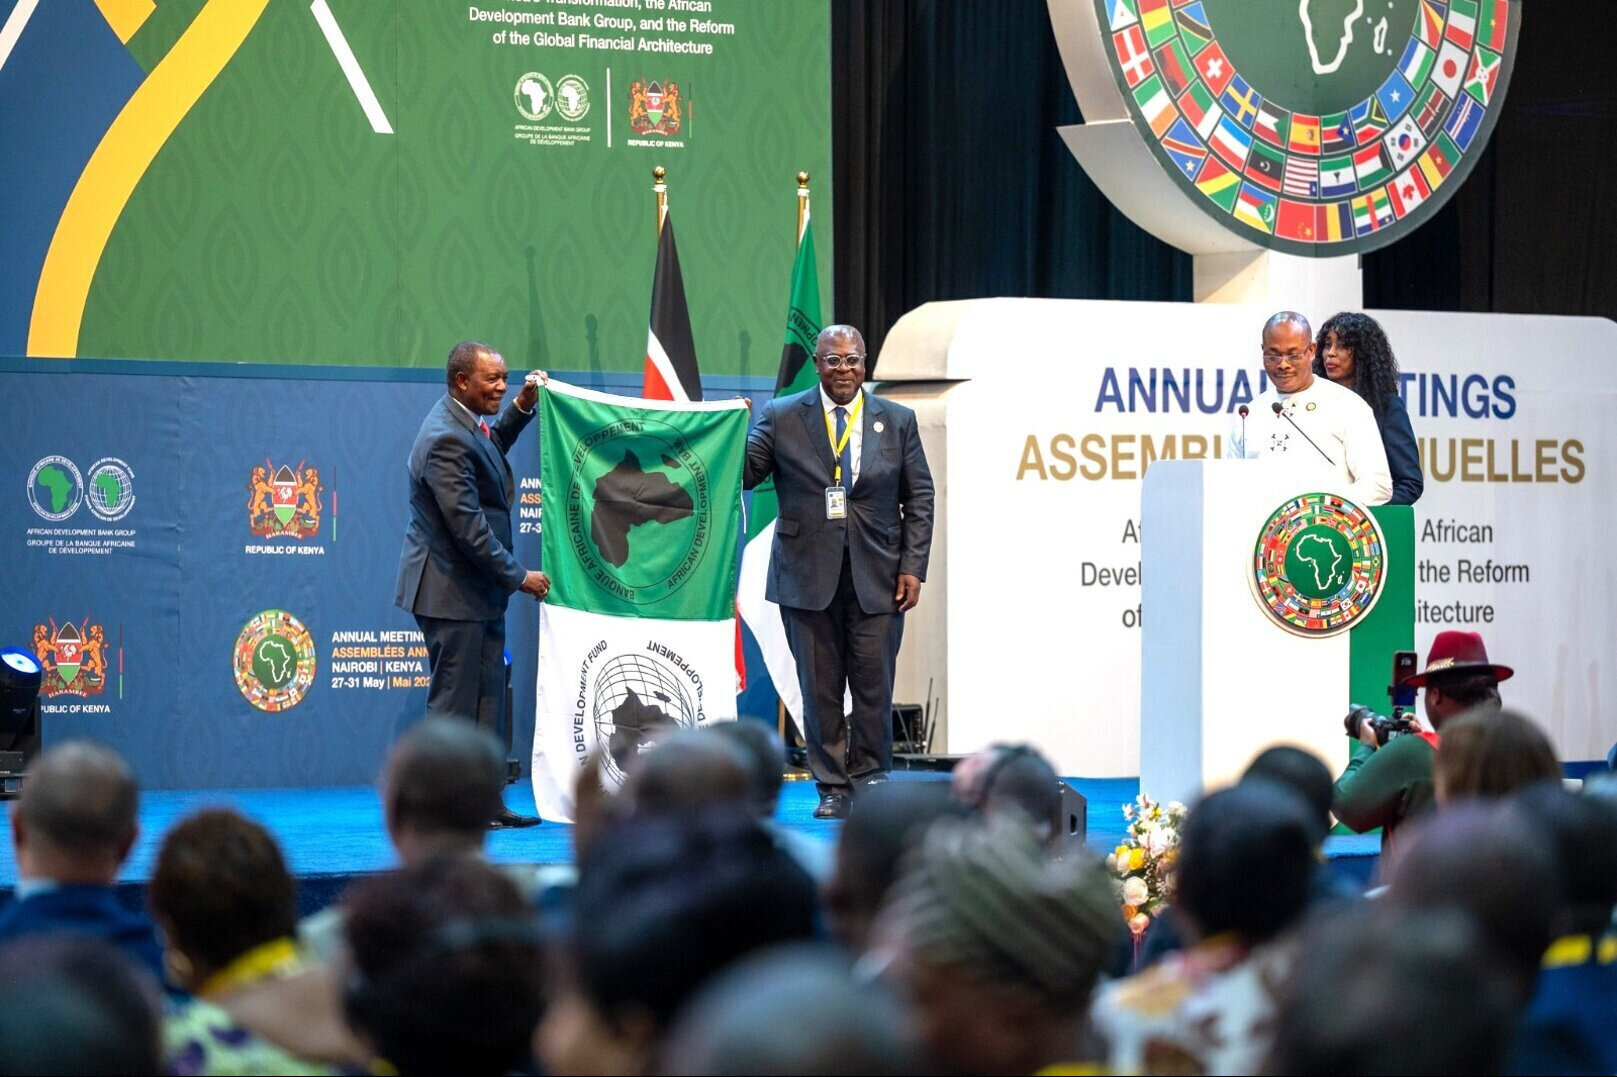 Annual Meeting of the AfDB: Ivorian Government Promises Perfect Organization for 2025 Edition